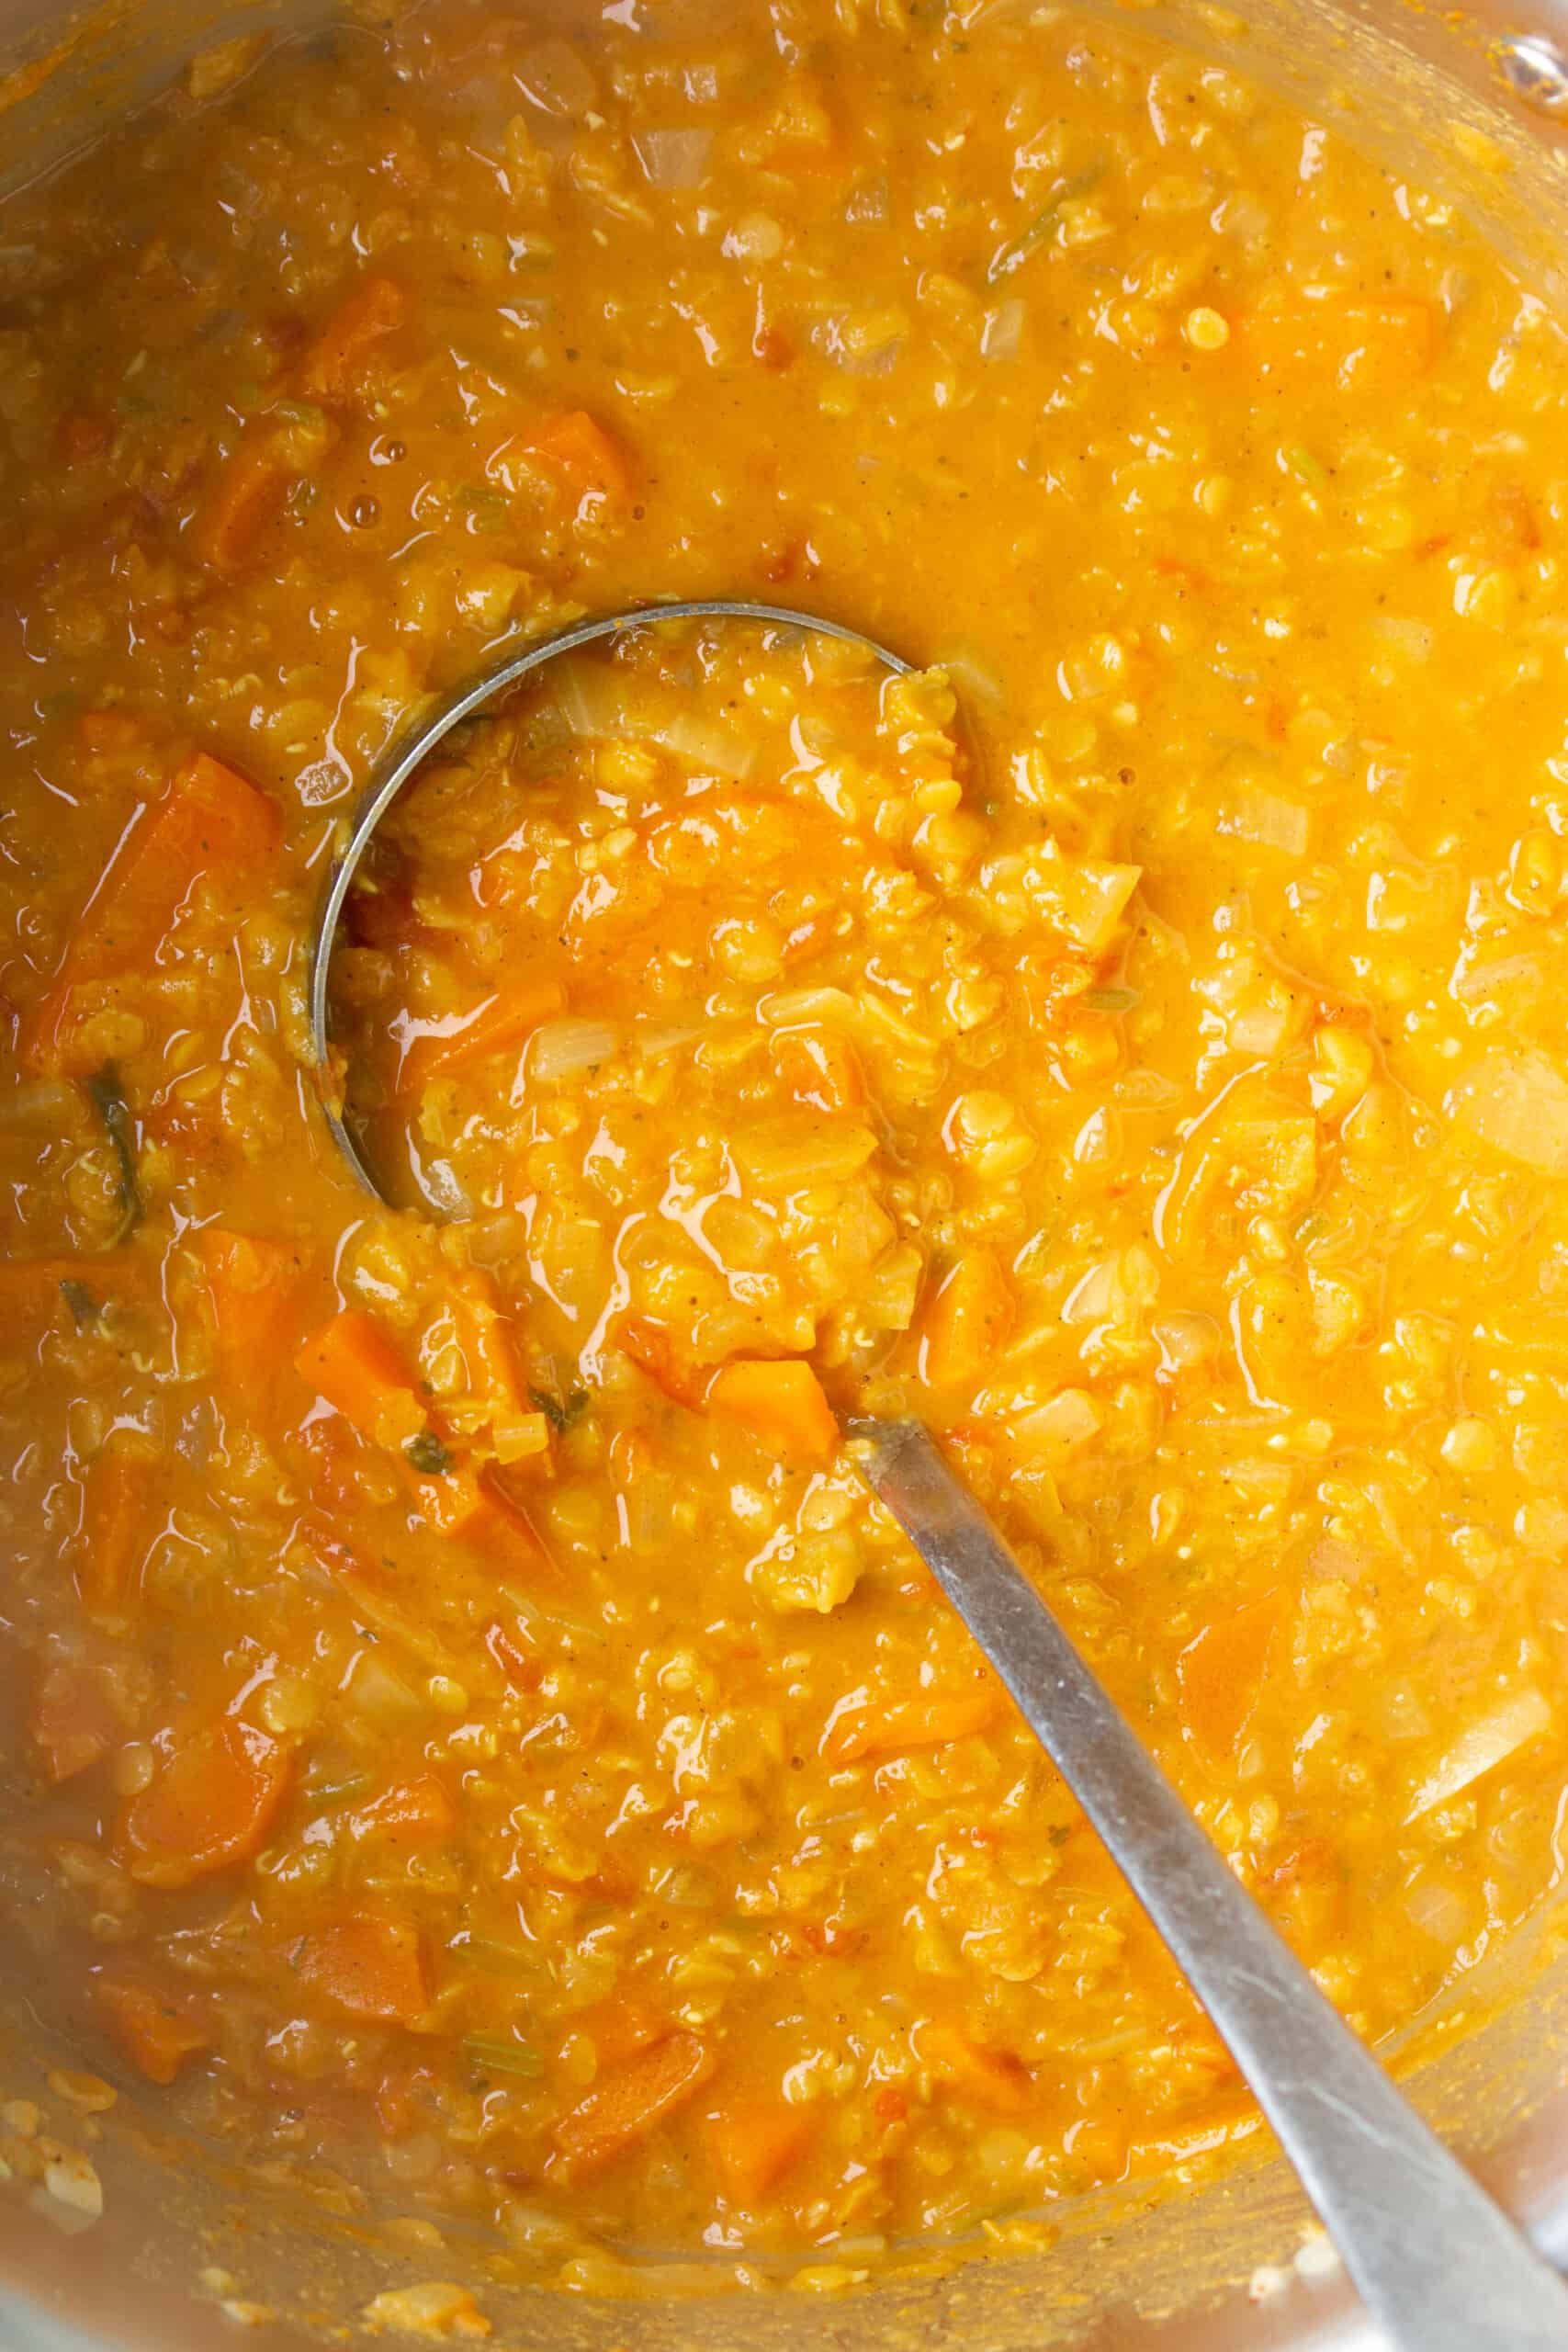 A shot of the dahl within the pan. Ladle placed in pot scooping a serving